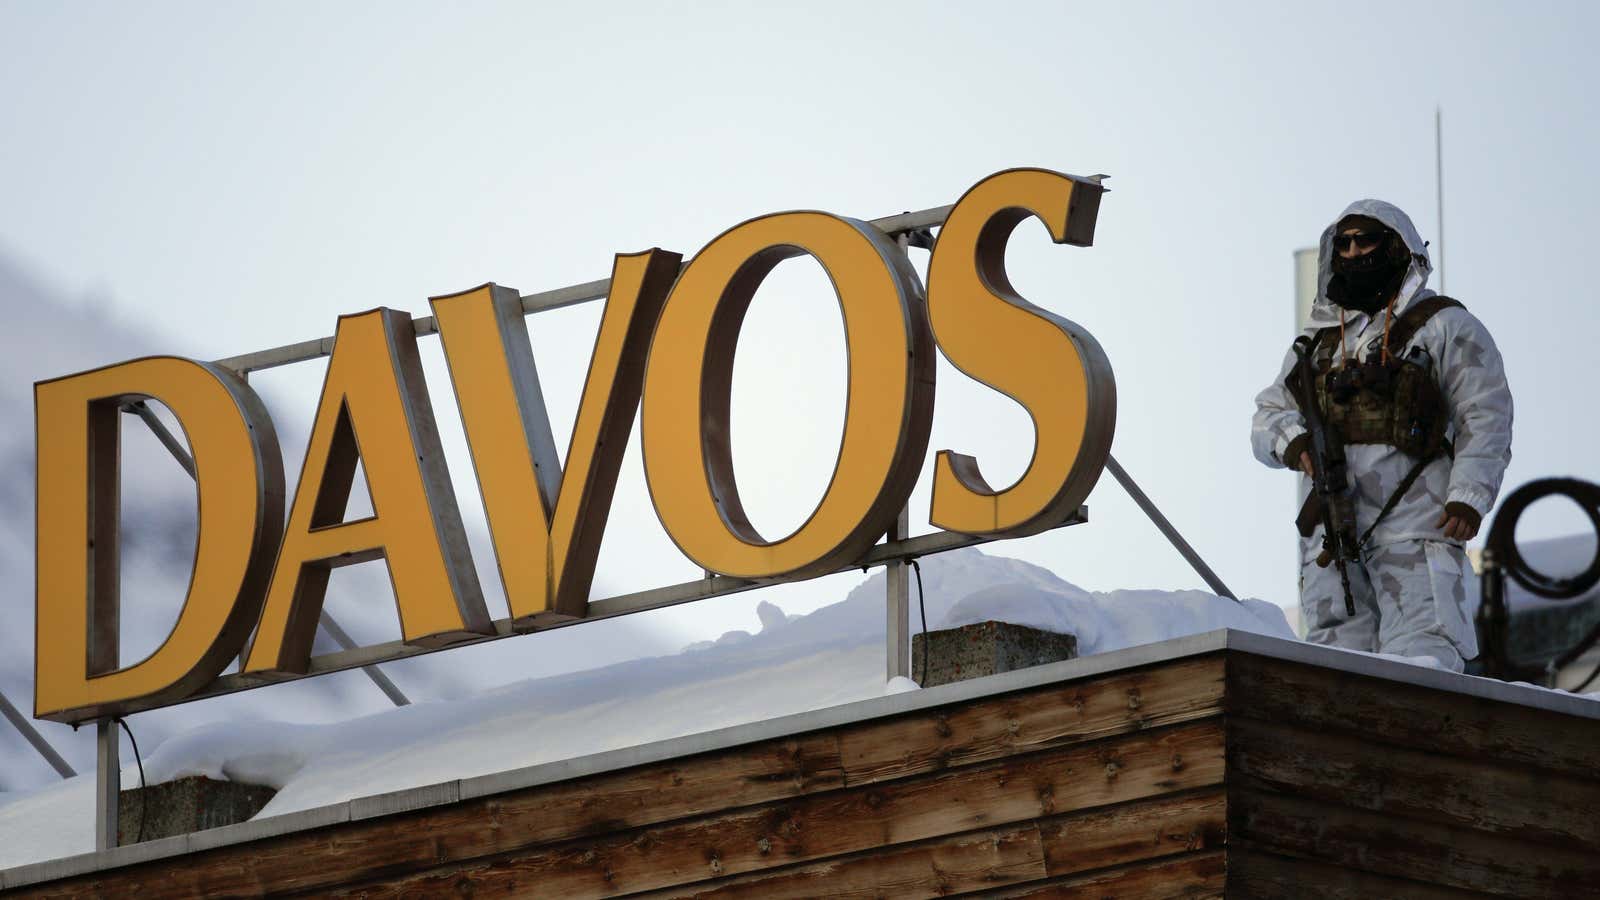 The list of delegates to the 2020 World Economic Forum in Davos